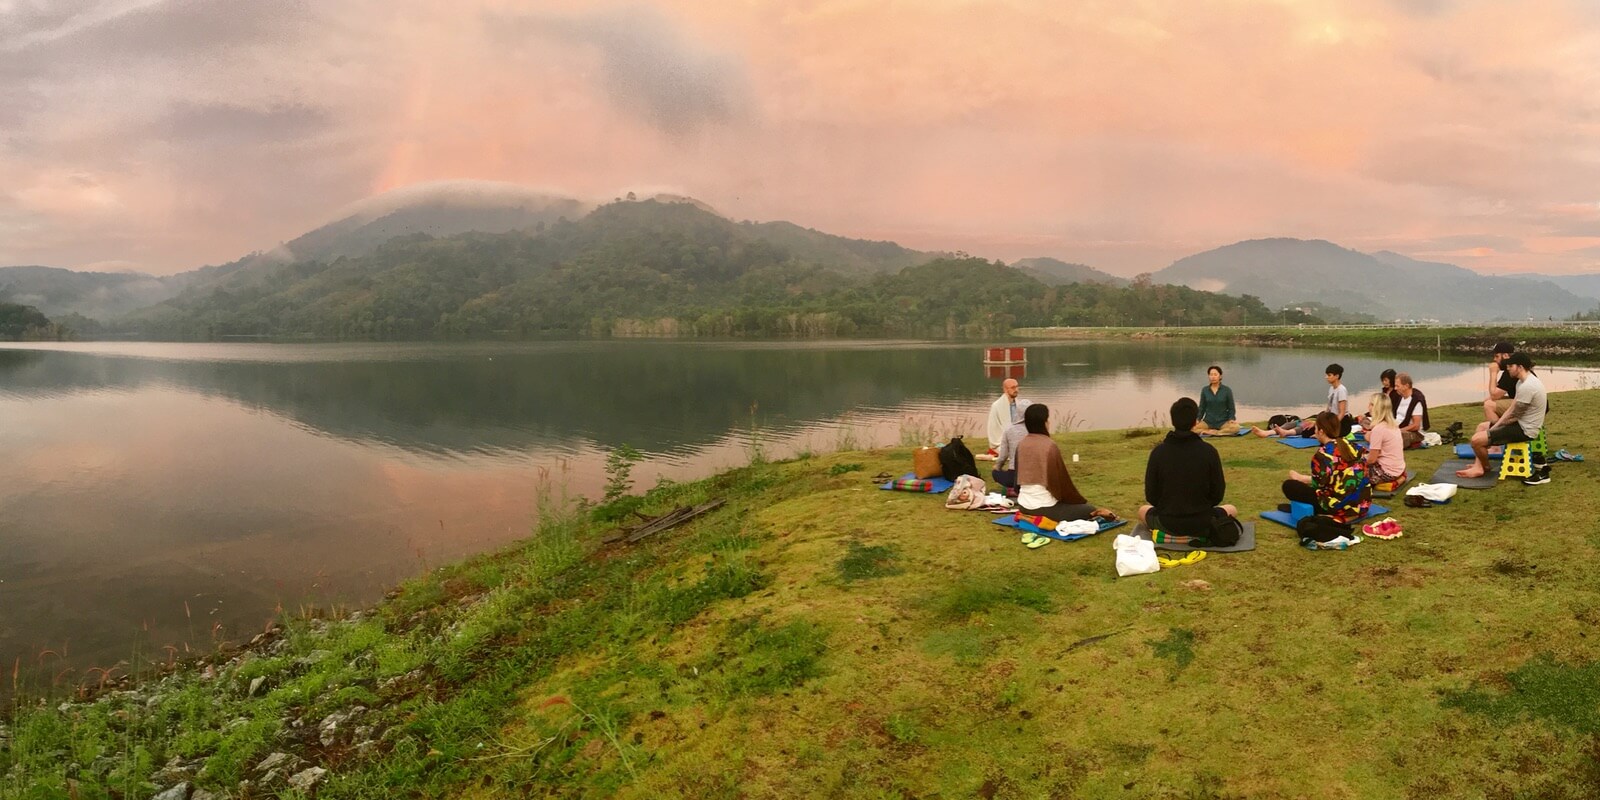 People meditate together at a lake, surrounded by tropical jungle and hills. This is the meditative lifestyle.